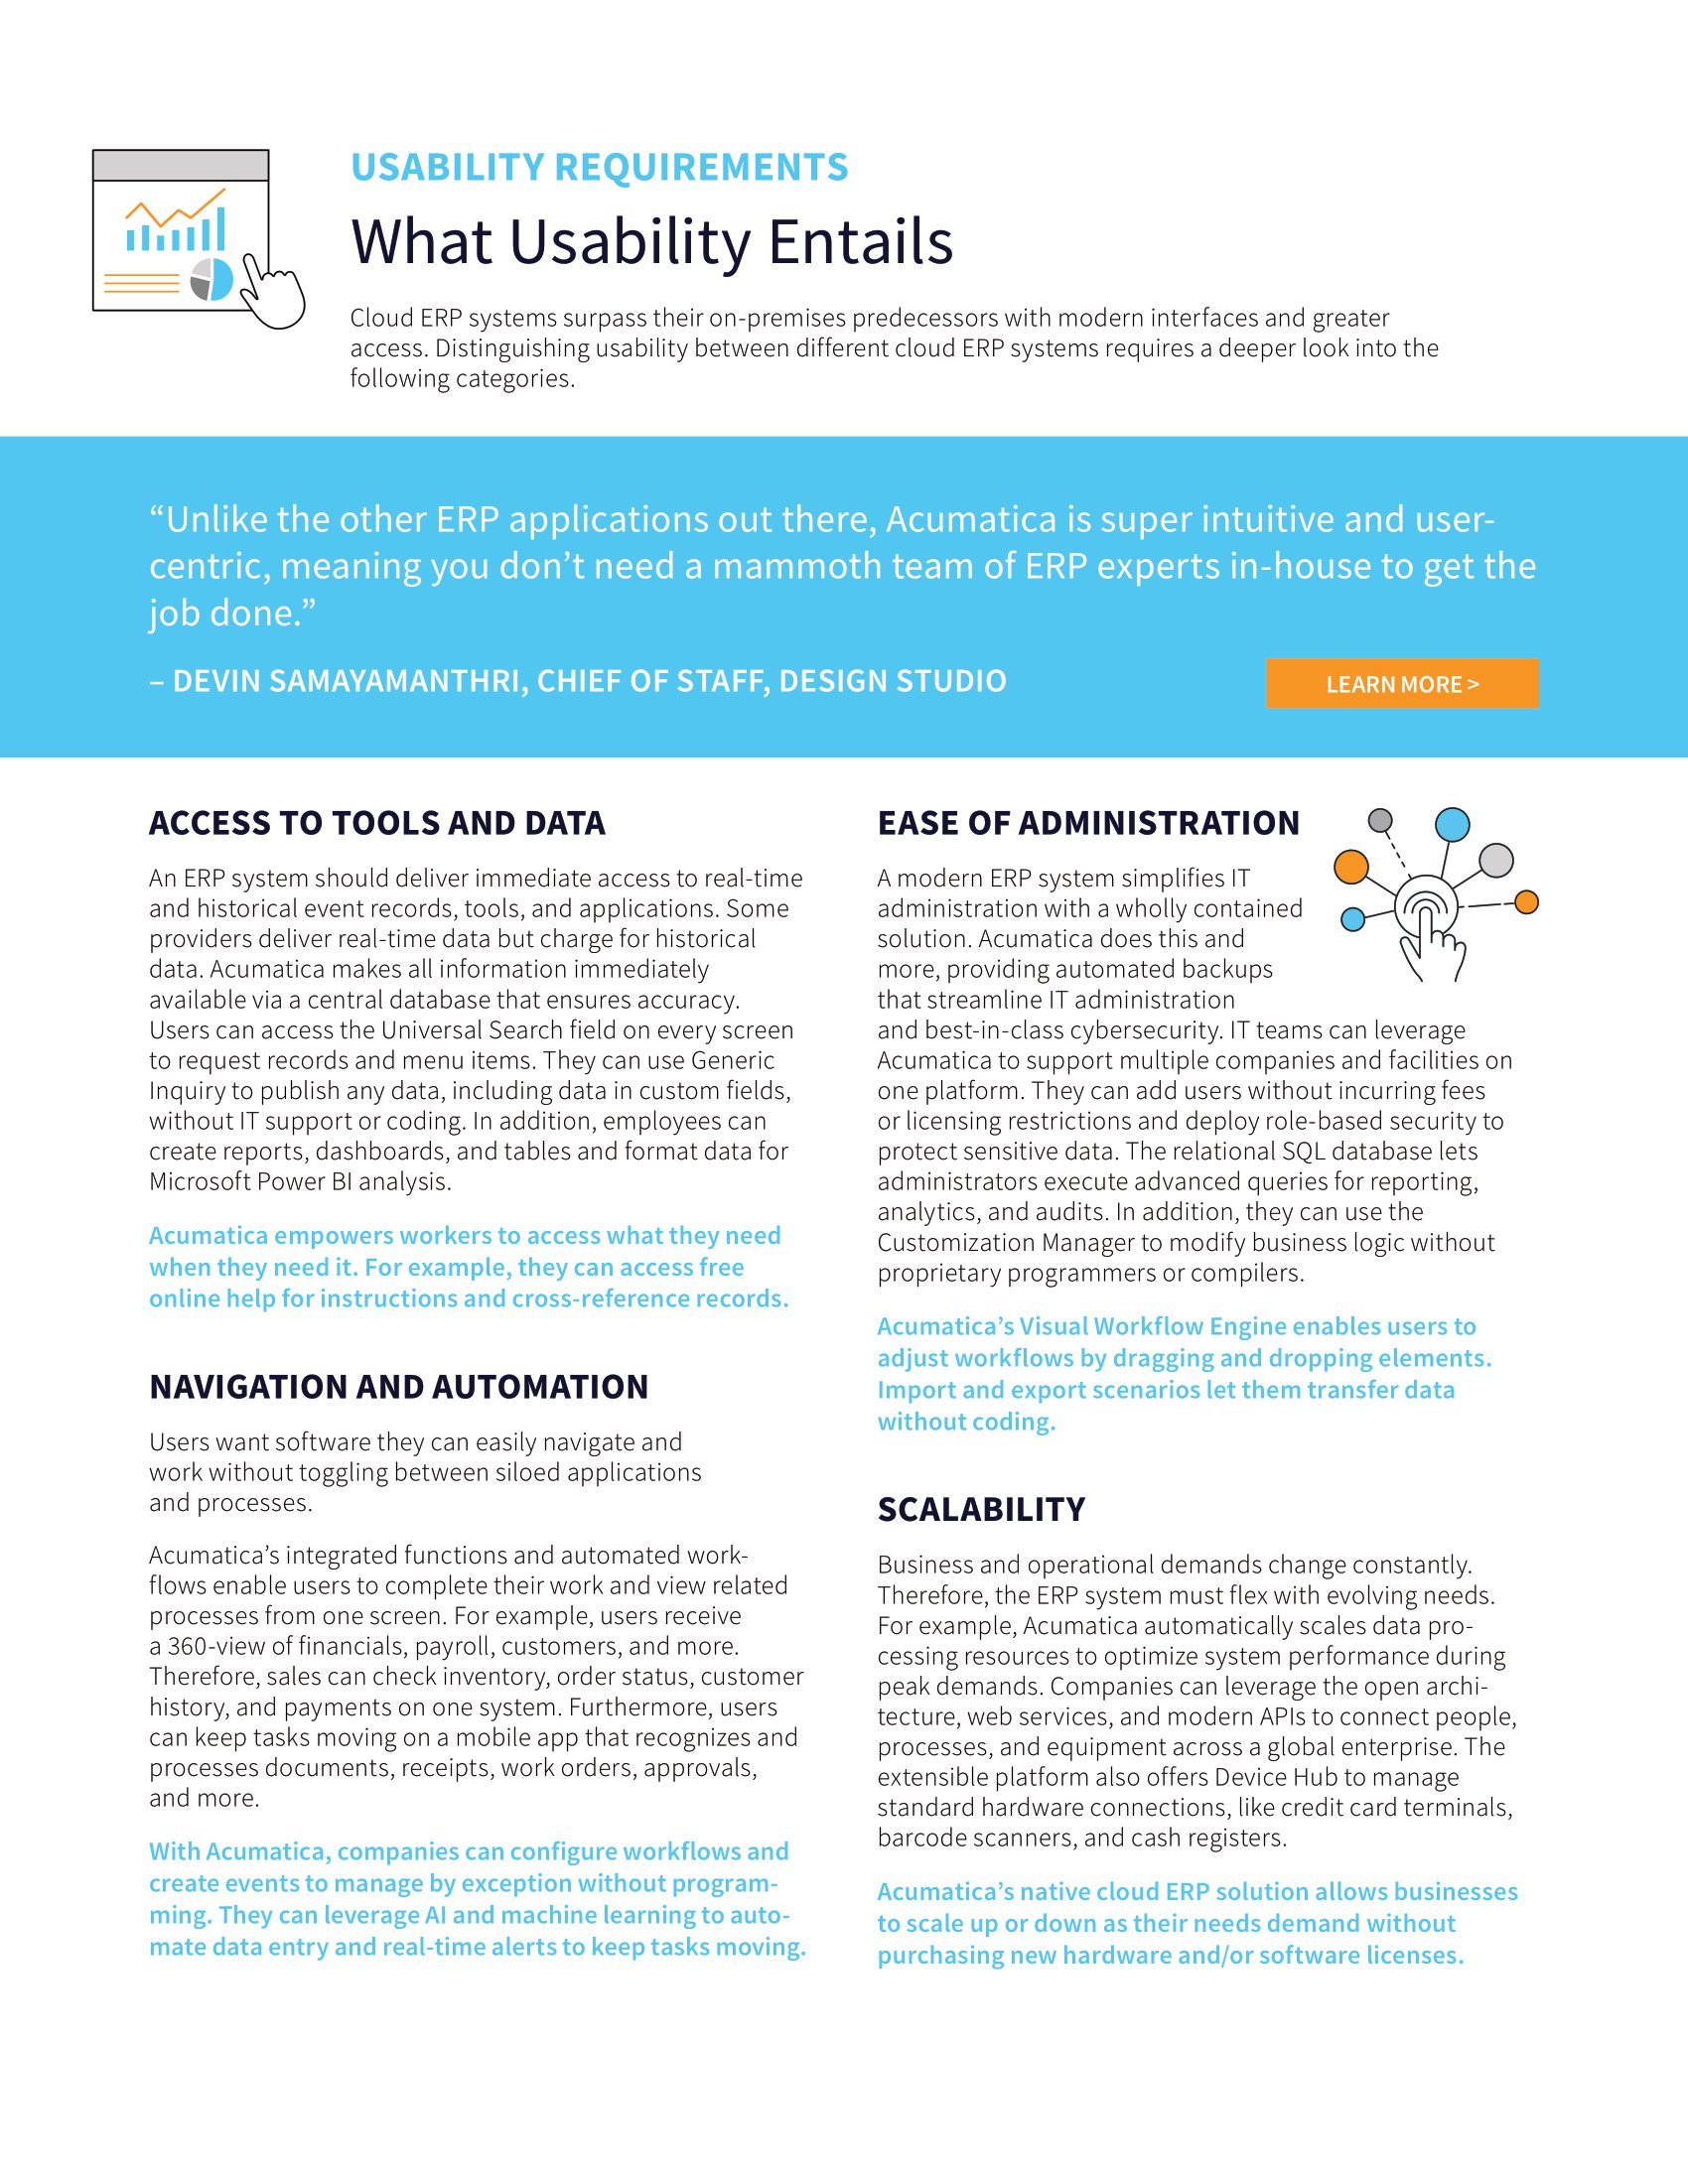 ERP Usability: Why It Matters, page 2